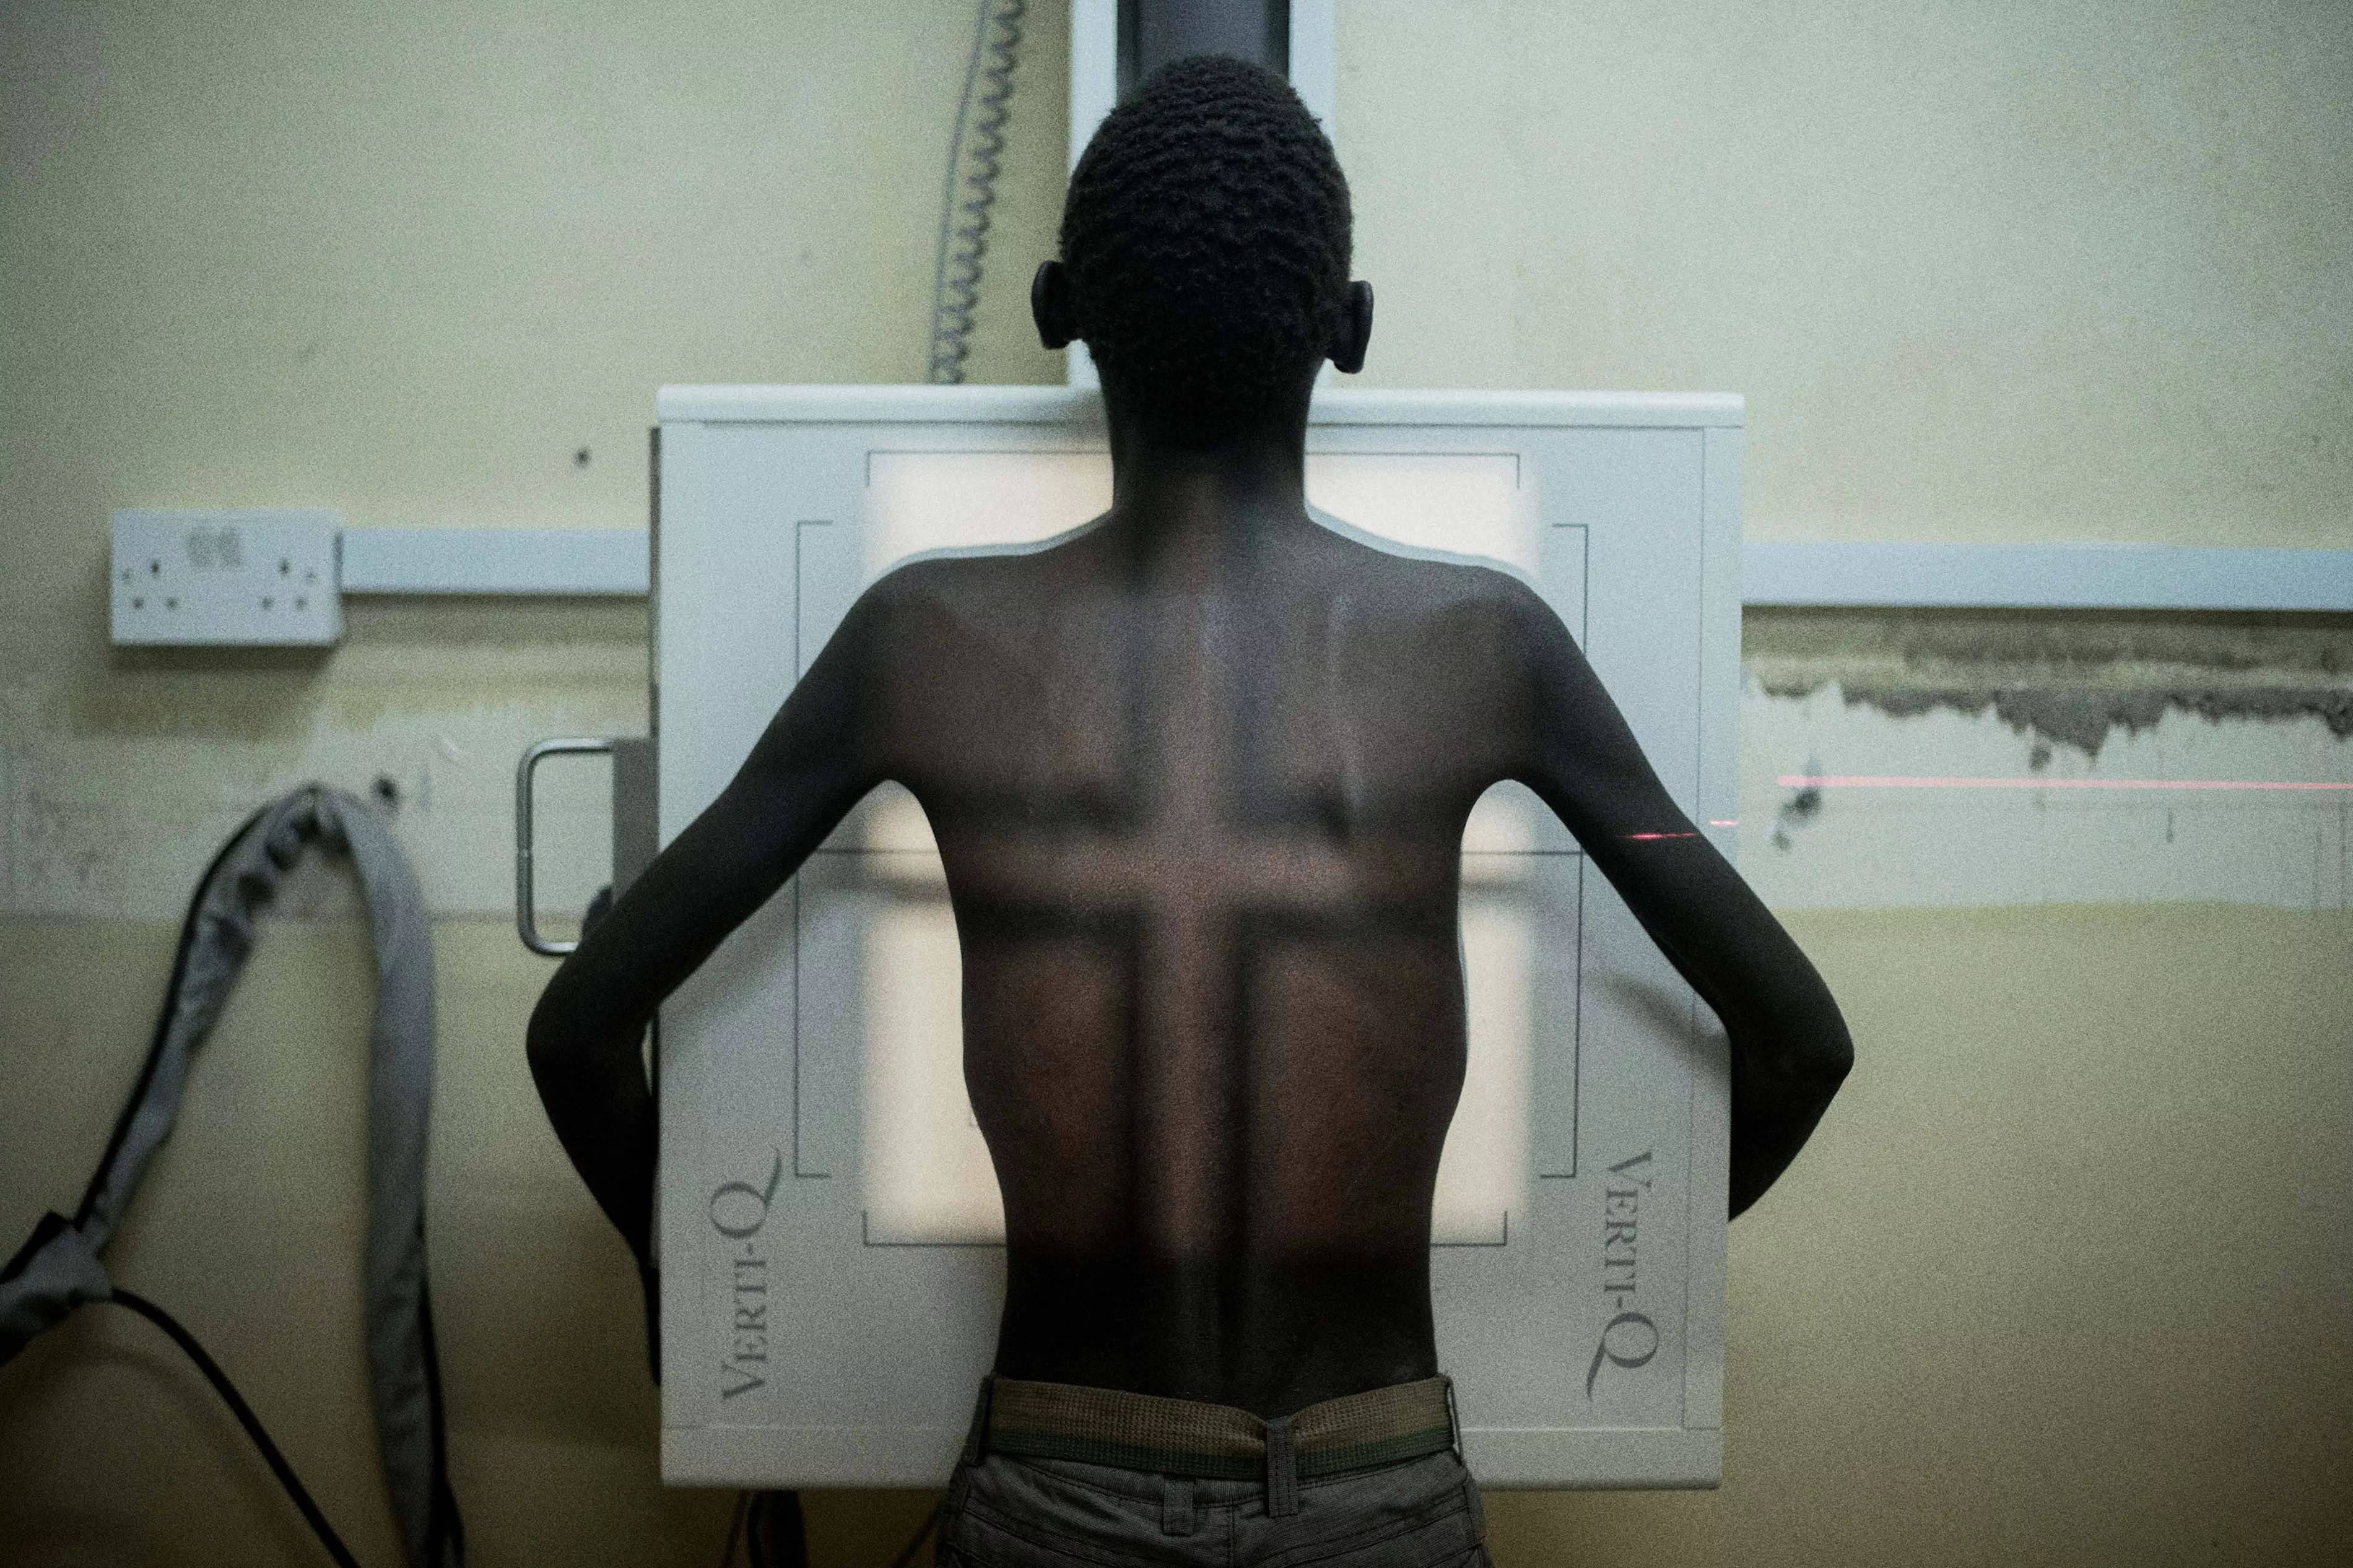 Nsanje, Malawi: Simbazako, 19 years, undergoes radiography for tuberculosis in Nsanje district hospital, Malawi. He says: “I feel too much pain in my ribs. I take my ARVs without skipping even a day but my health is not improving as I had expected.”